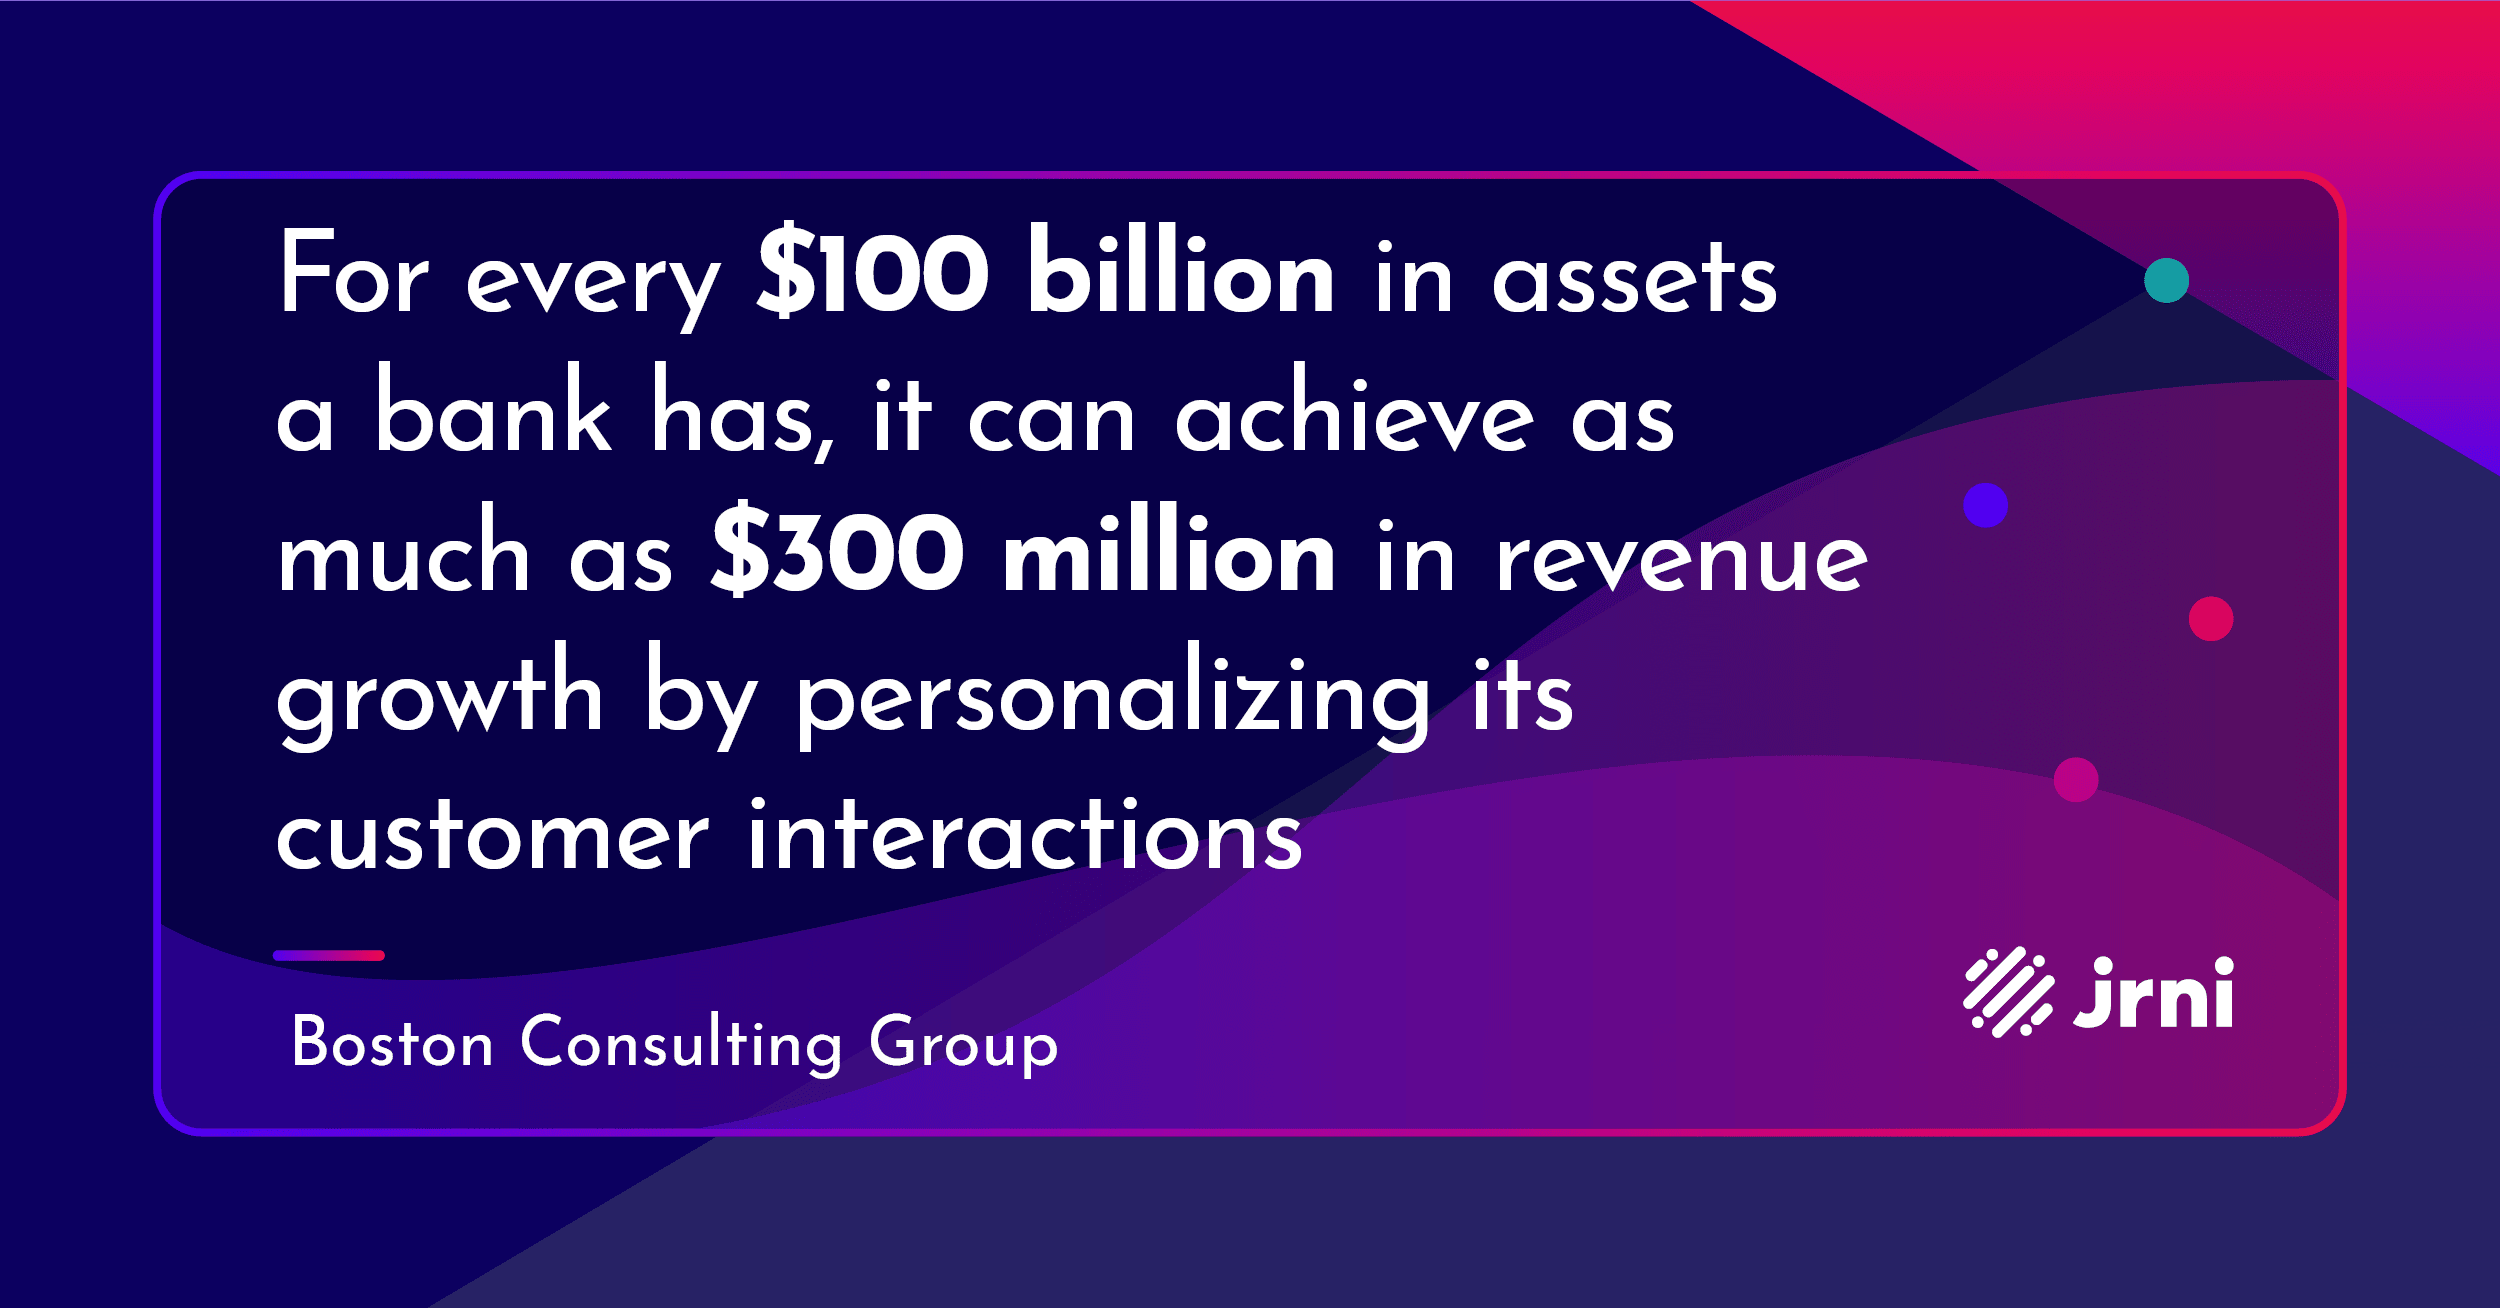 According to Boston Consulting Group, “For every $100 billion in assets a bank has, it can achieve as much as $300 million in revenue growth by personalizing its customer interactions.”